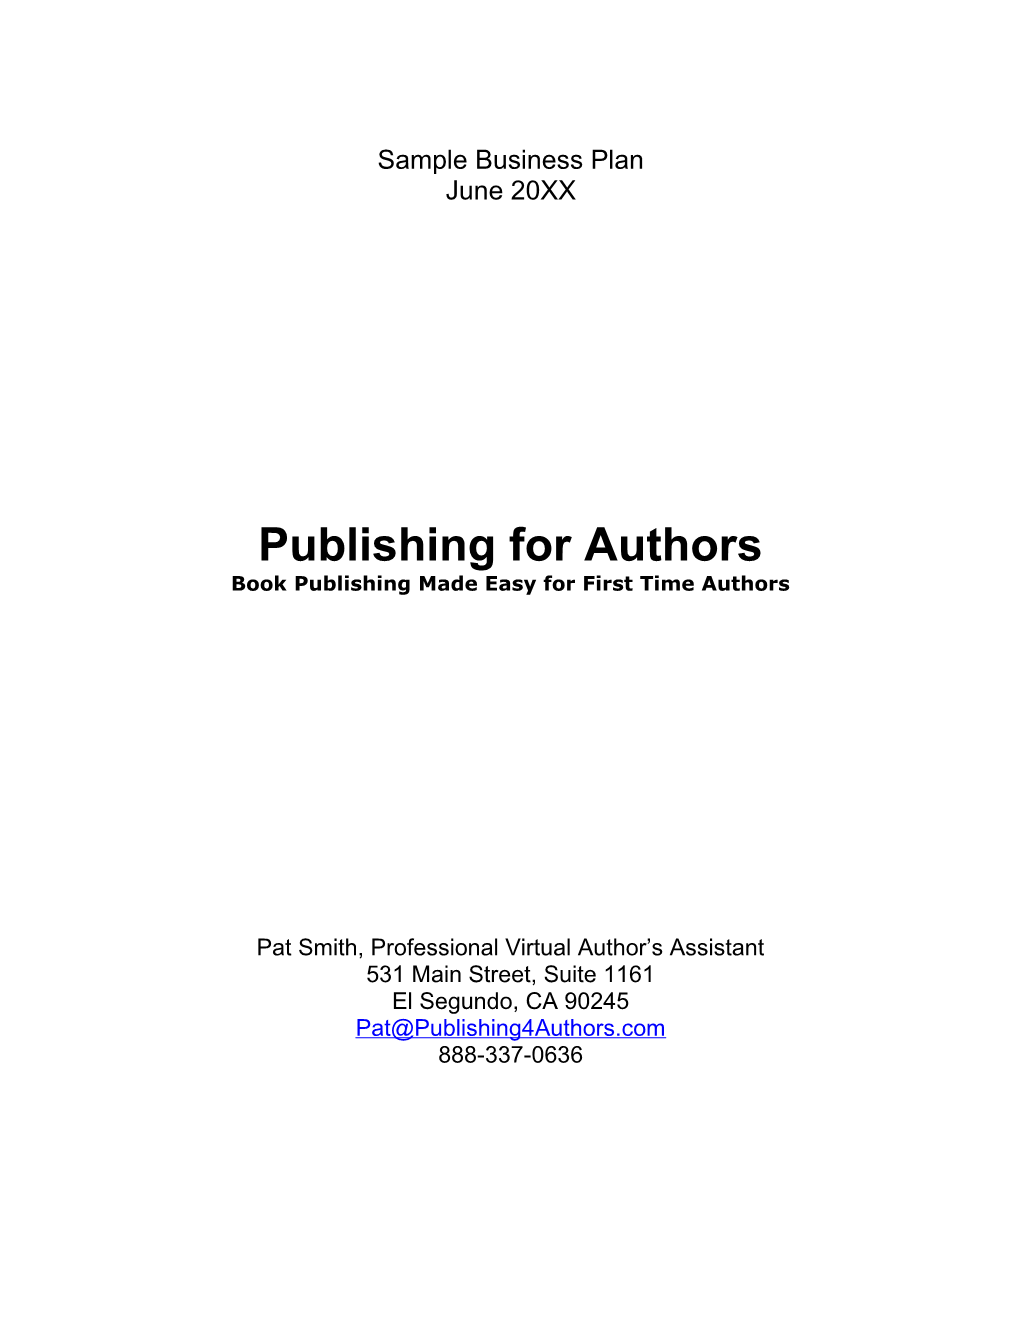 Book Publishing Made Easy for First Time Authors